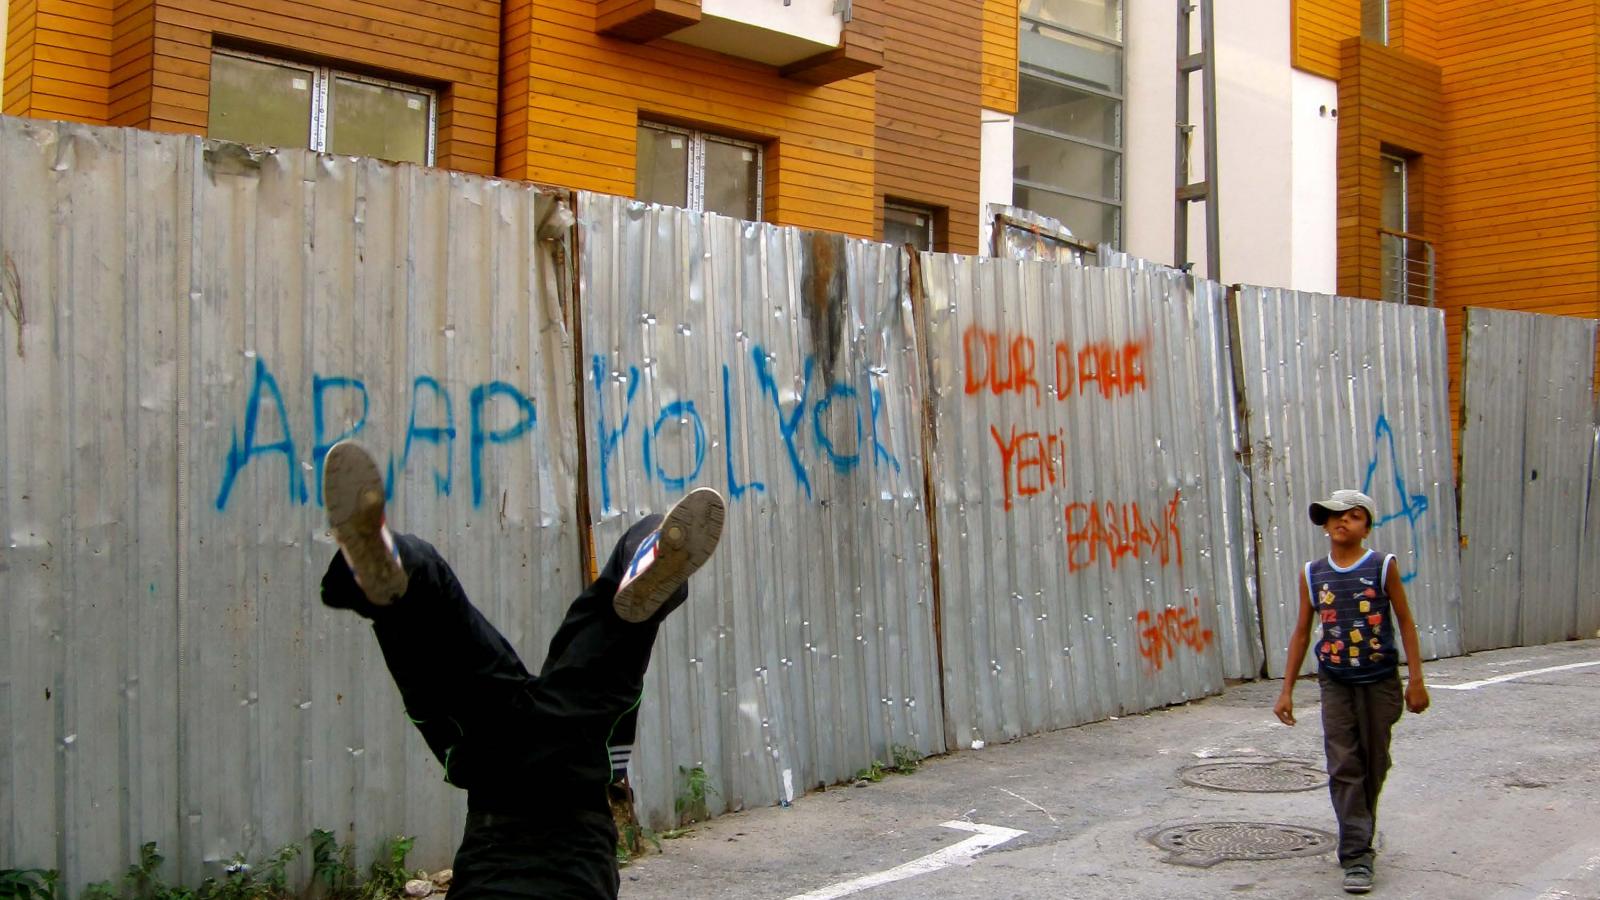 Image of break dance on Street in Istanbul.Title: "What side of the fence?" by Danielle Schoon. Published with permission of the author. All rights reserved. 